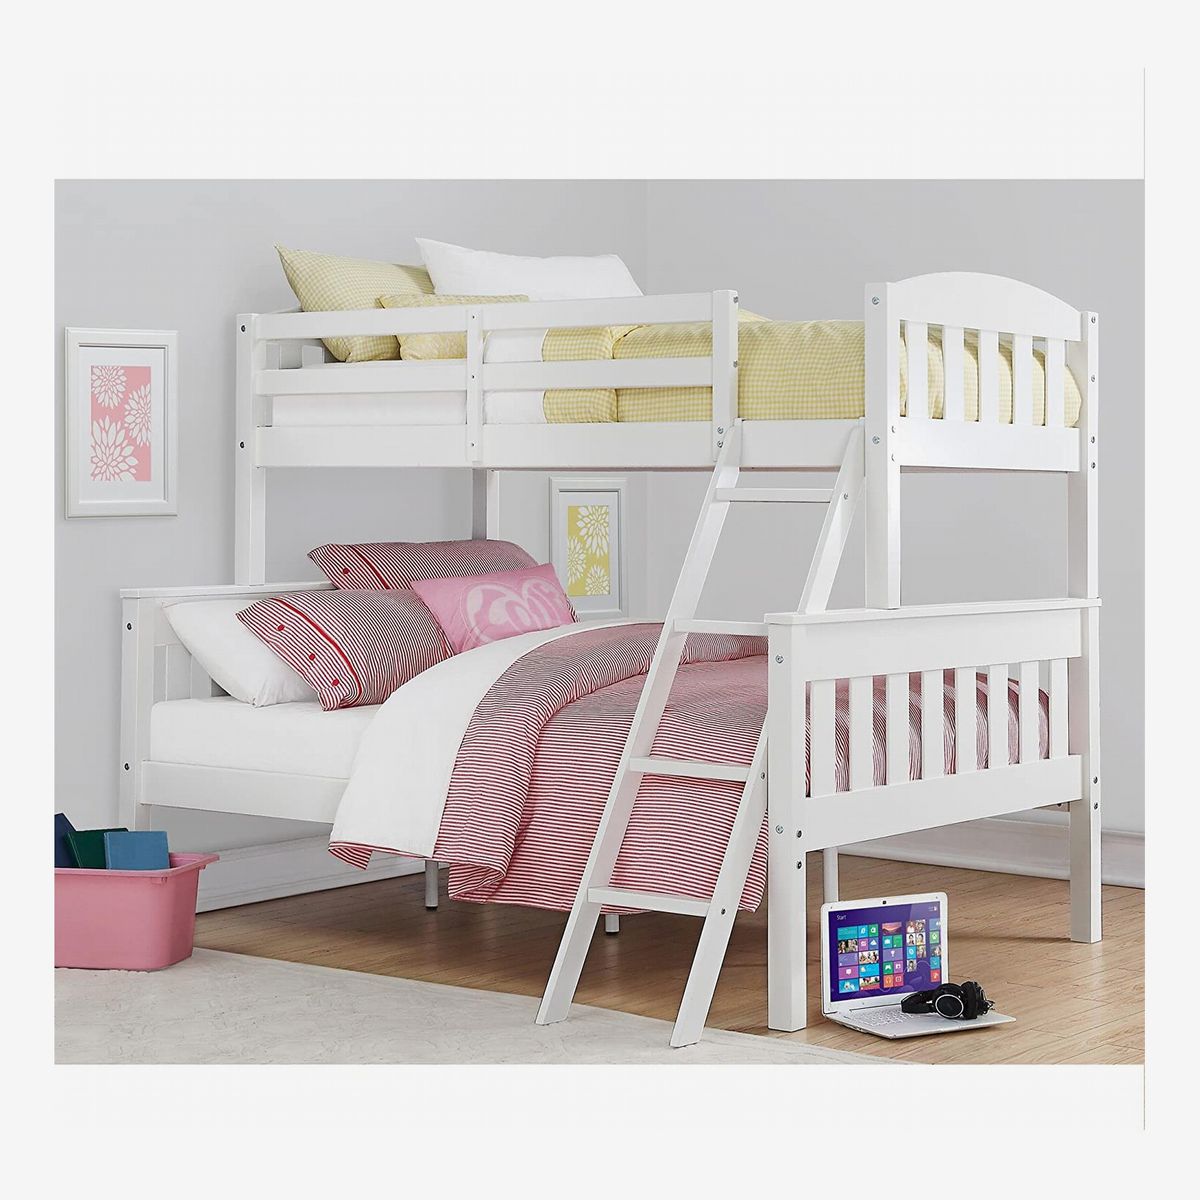 8 Best Bunk Beds 2020 The Strategist, Old Bunk Beds White